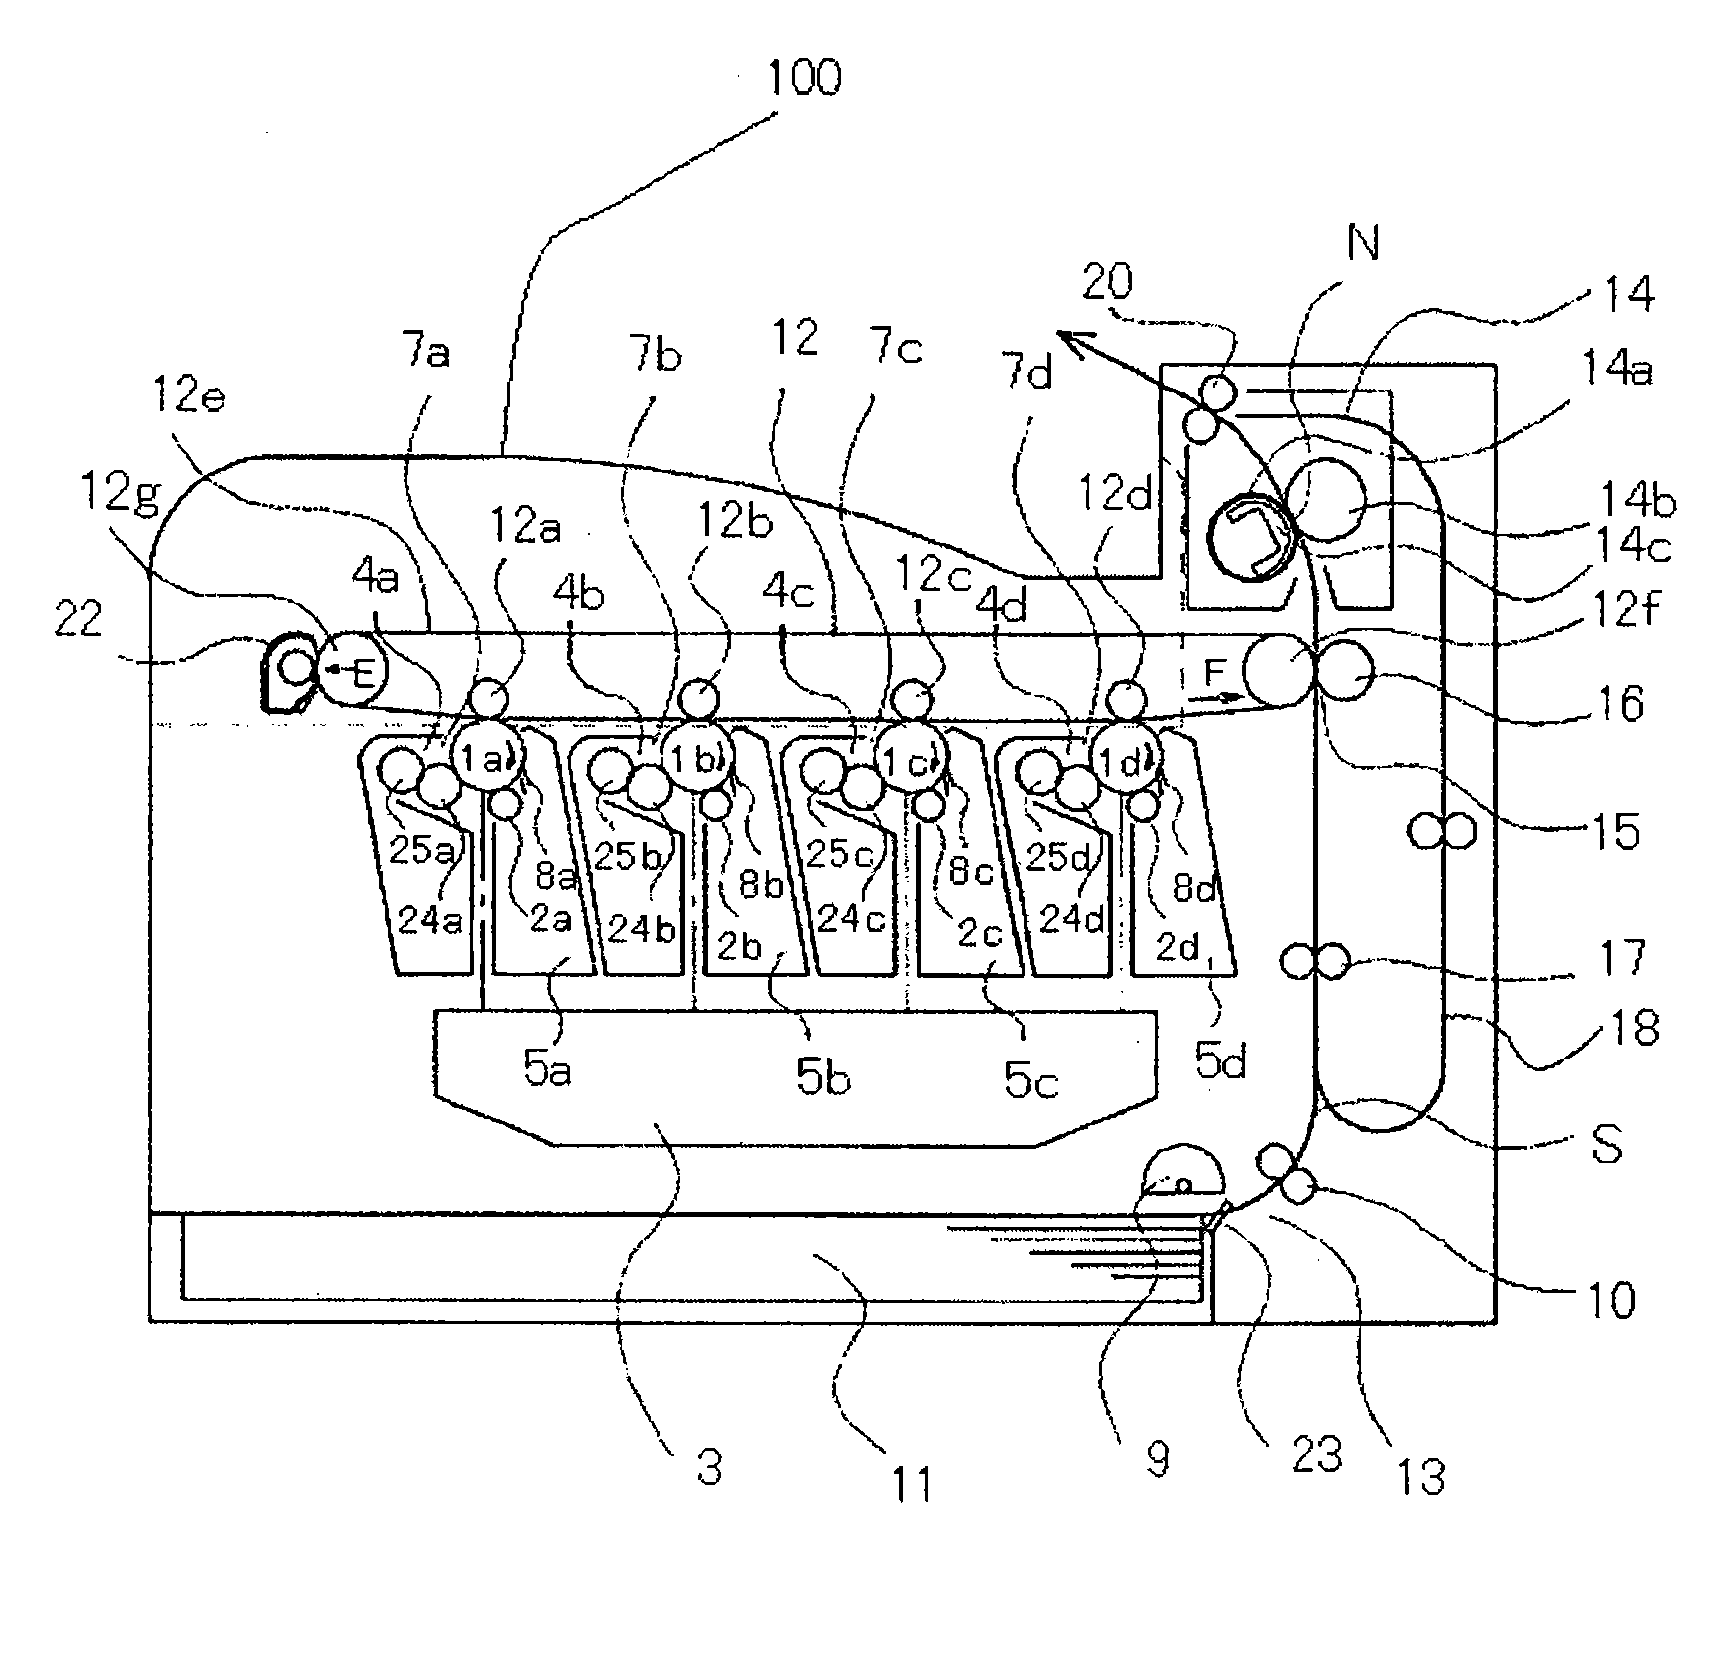 Image forming apparatus having a first coupling and a second coupling